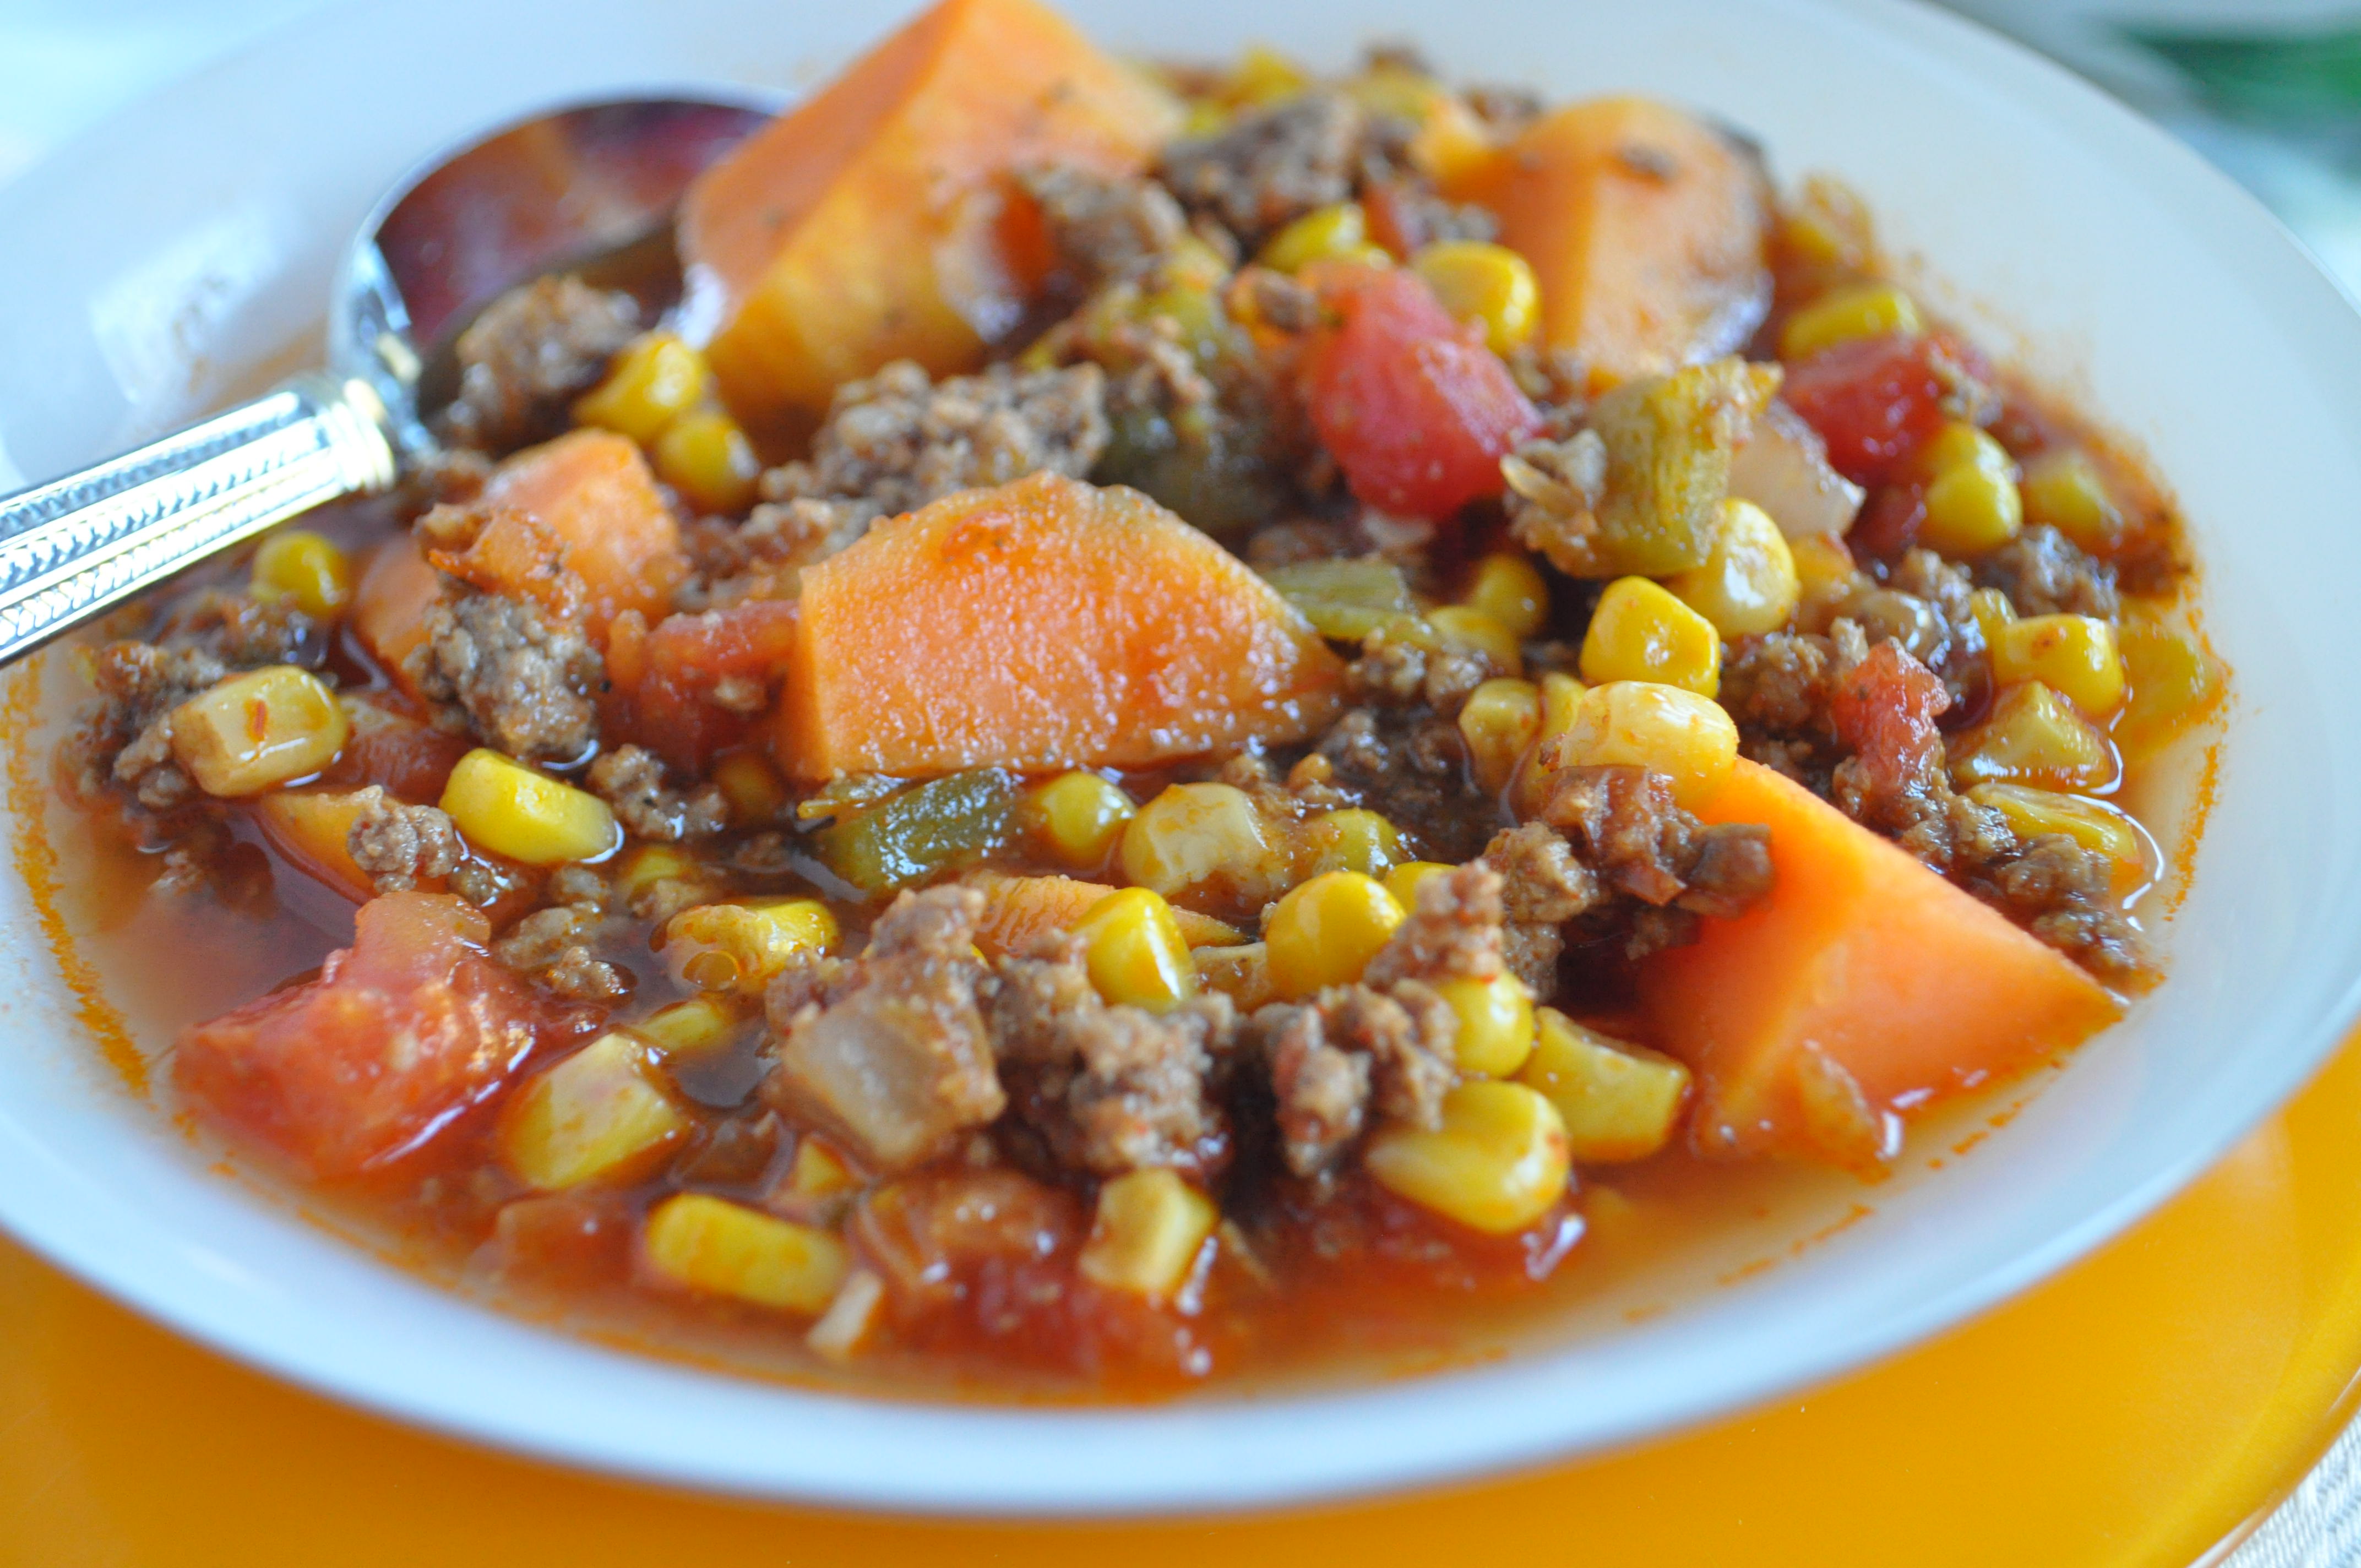 This hearty soup is chock full of ground sirloin, zesty diced tomatoes, green chilies and ripe sweet potatoes and corn, giving it that perfect Southwestern full flavor that will satisfy any cravings!